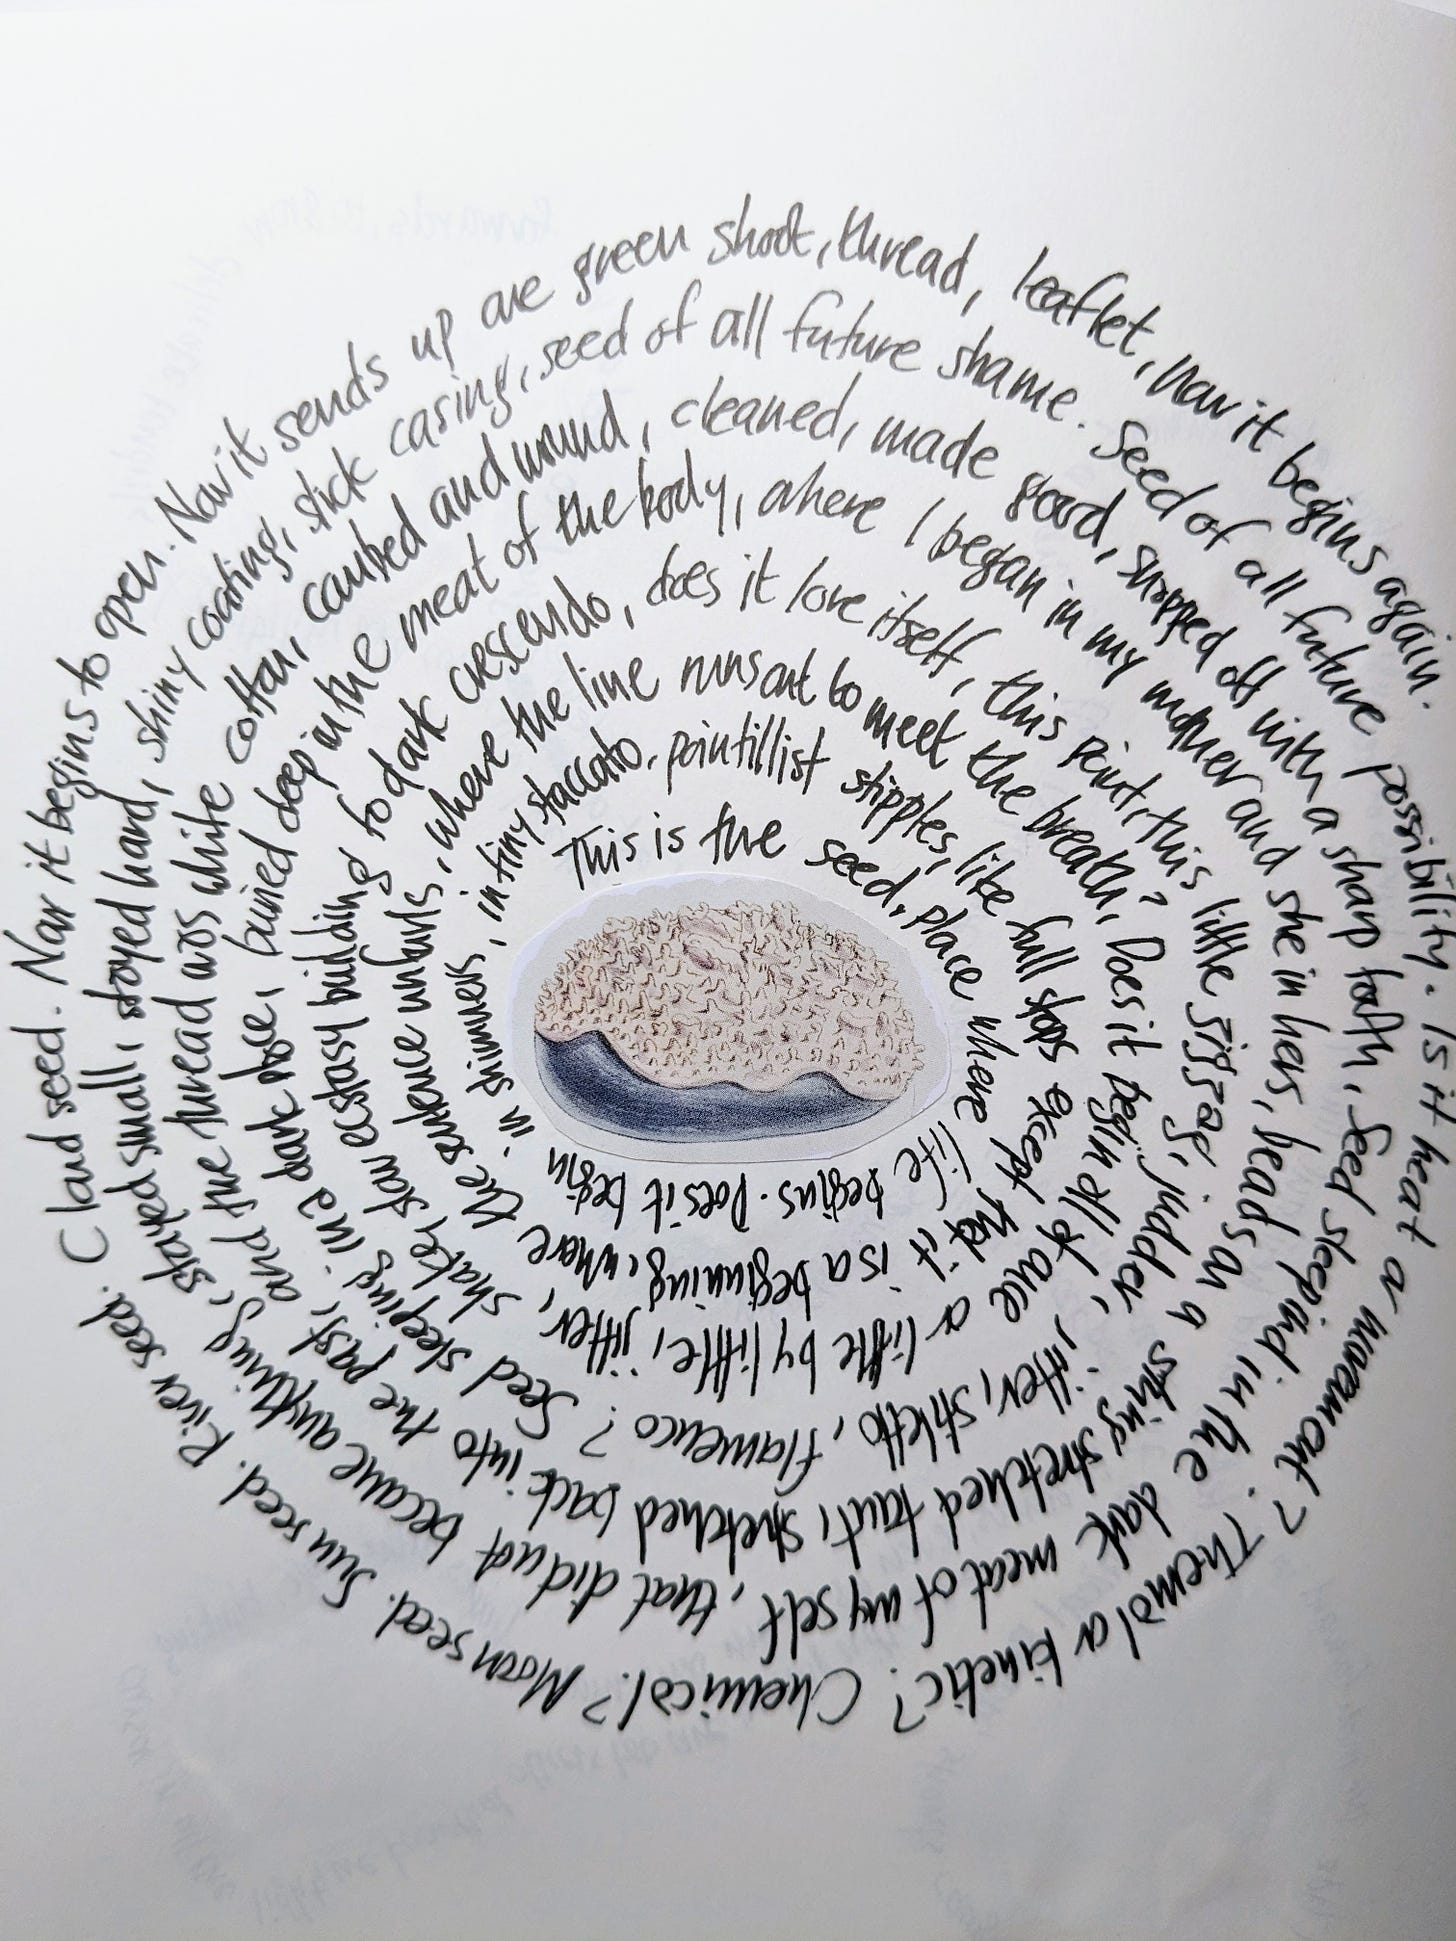 Handwritten aimage of spiral writing around a small collaged image of a seed by Sophie Nicholls